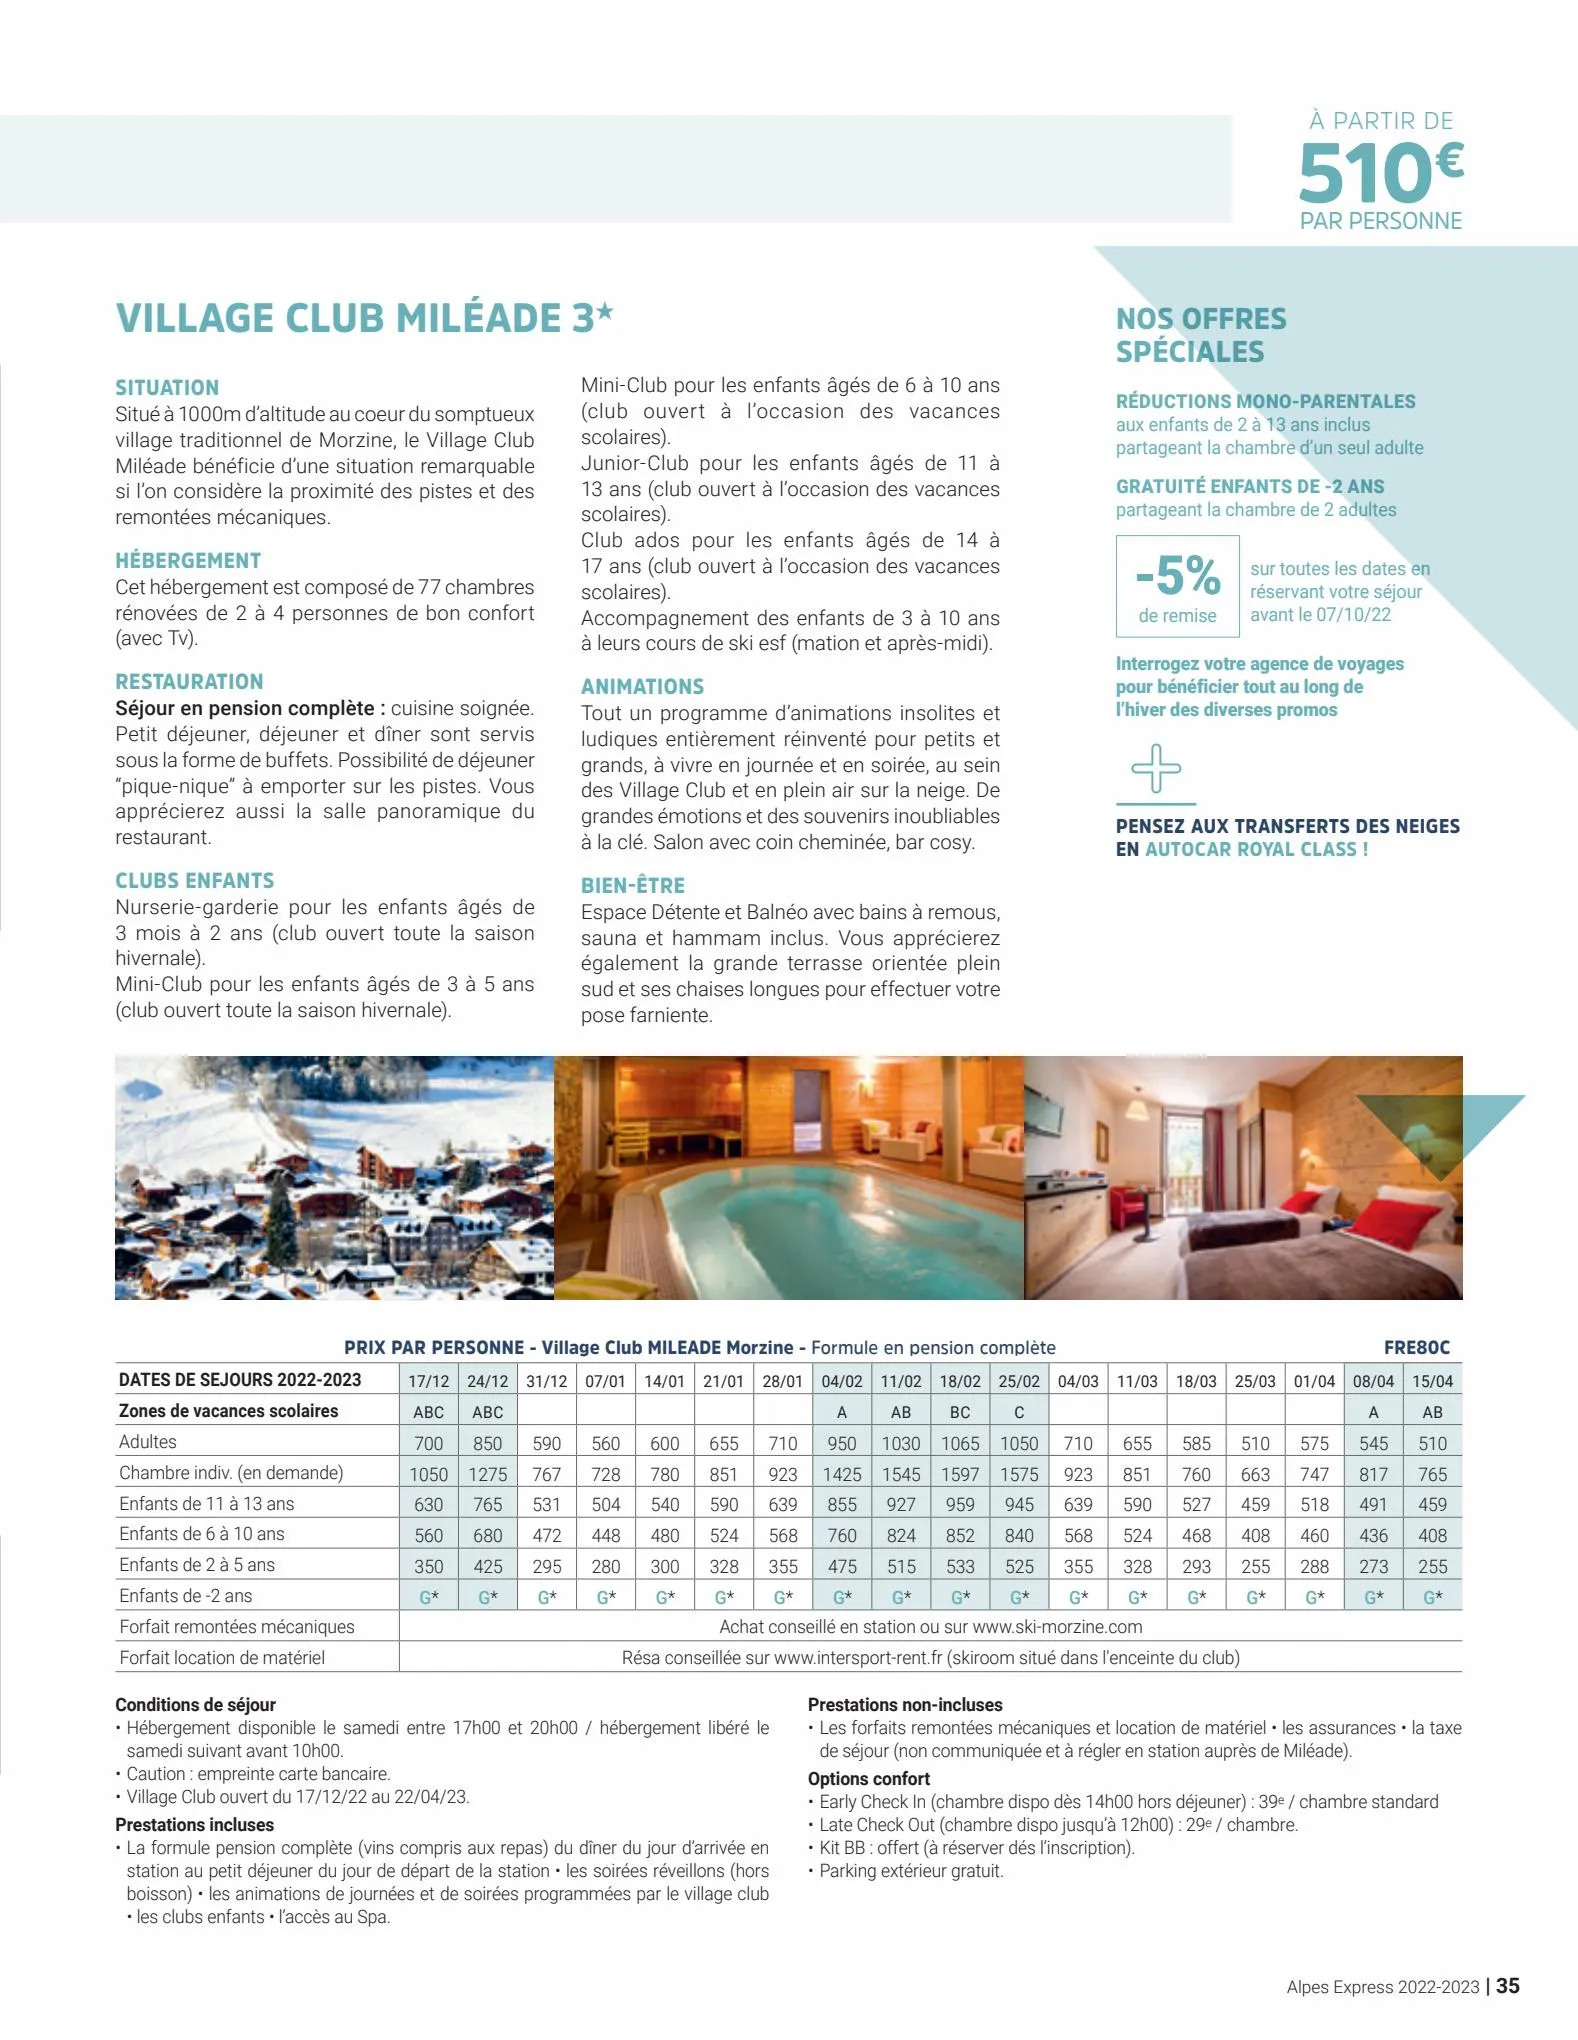 Catalogue Alpes Express - Hiver 2022-2023, page 00035